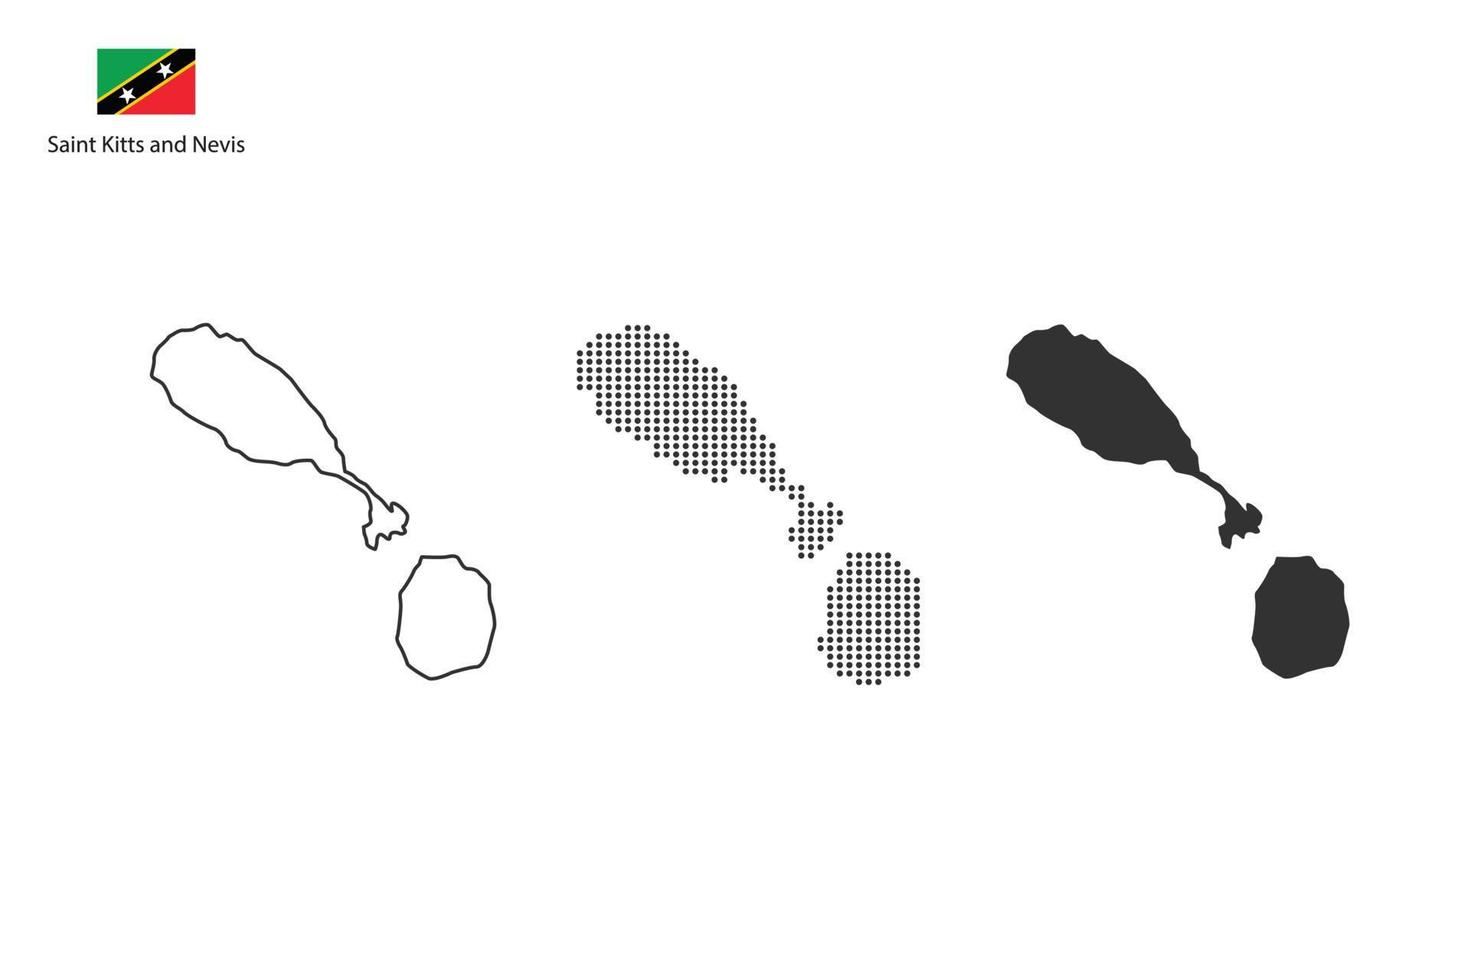 3 versions of Saint Kitts and Nevis map city vector by thin black outline simplicity style, Black dot style and Dark shadow style. All in the white background.